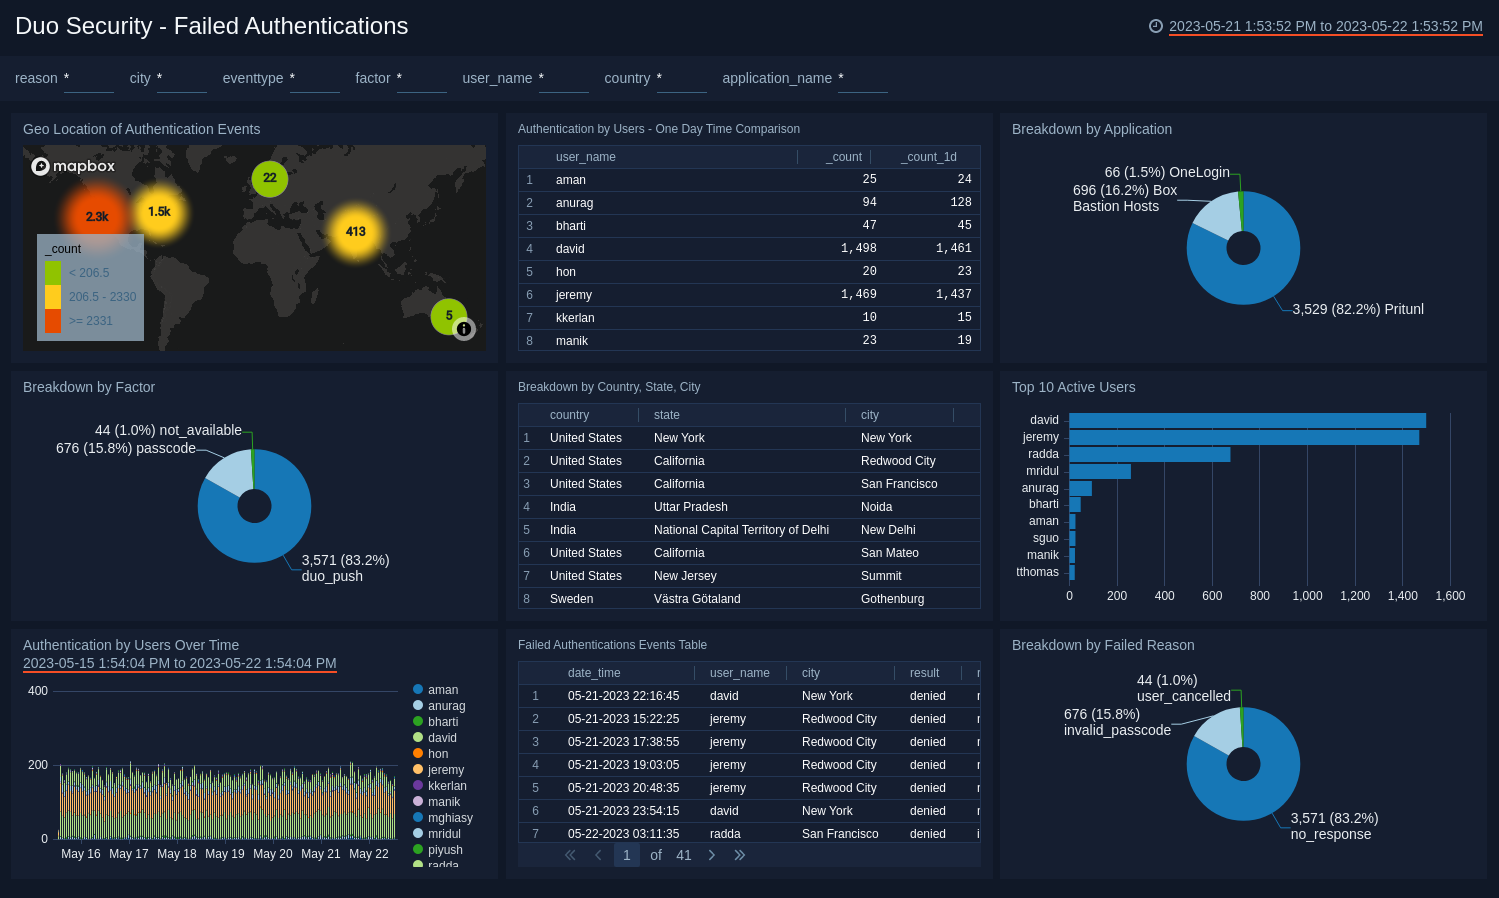 Duo Security dashboards